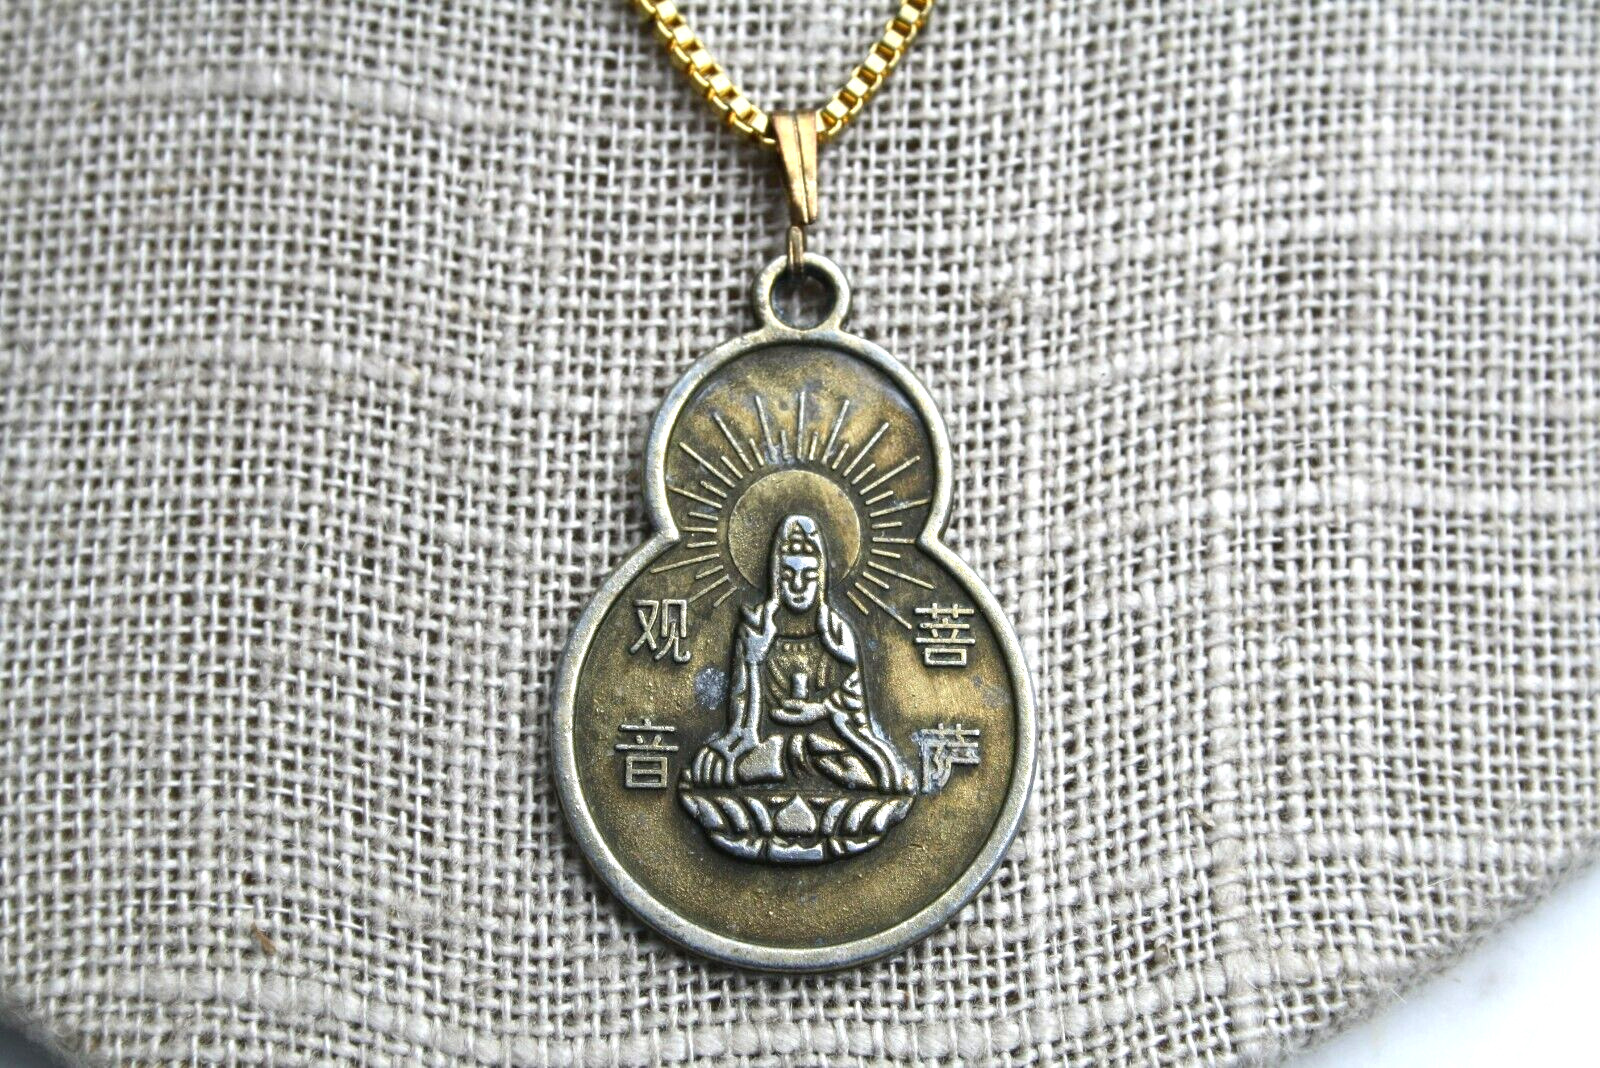 Handsome Rounded Lobed Brasstone Buddhist Blessing Medal Pendant Necklace Chain